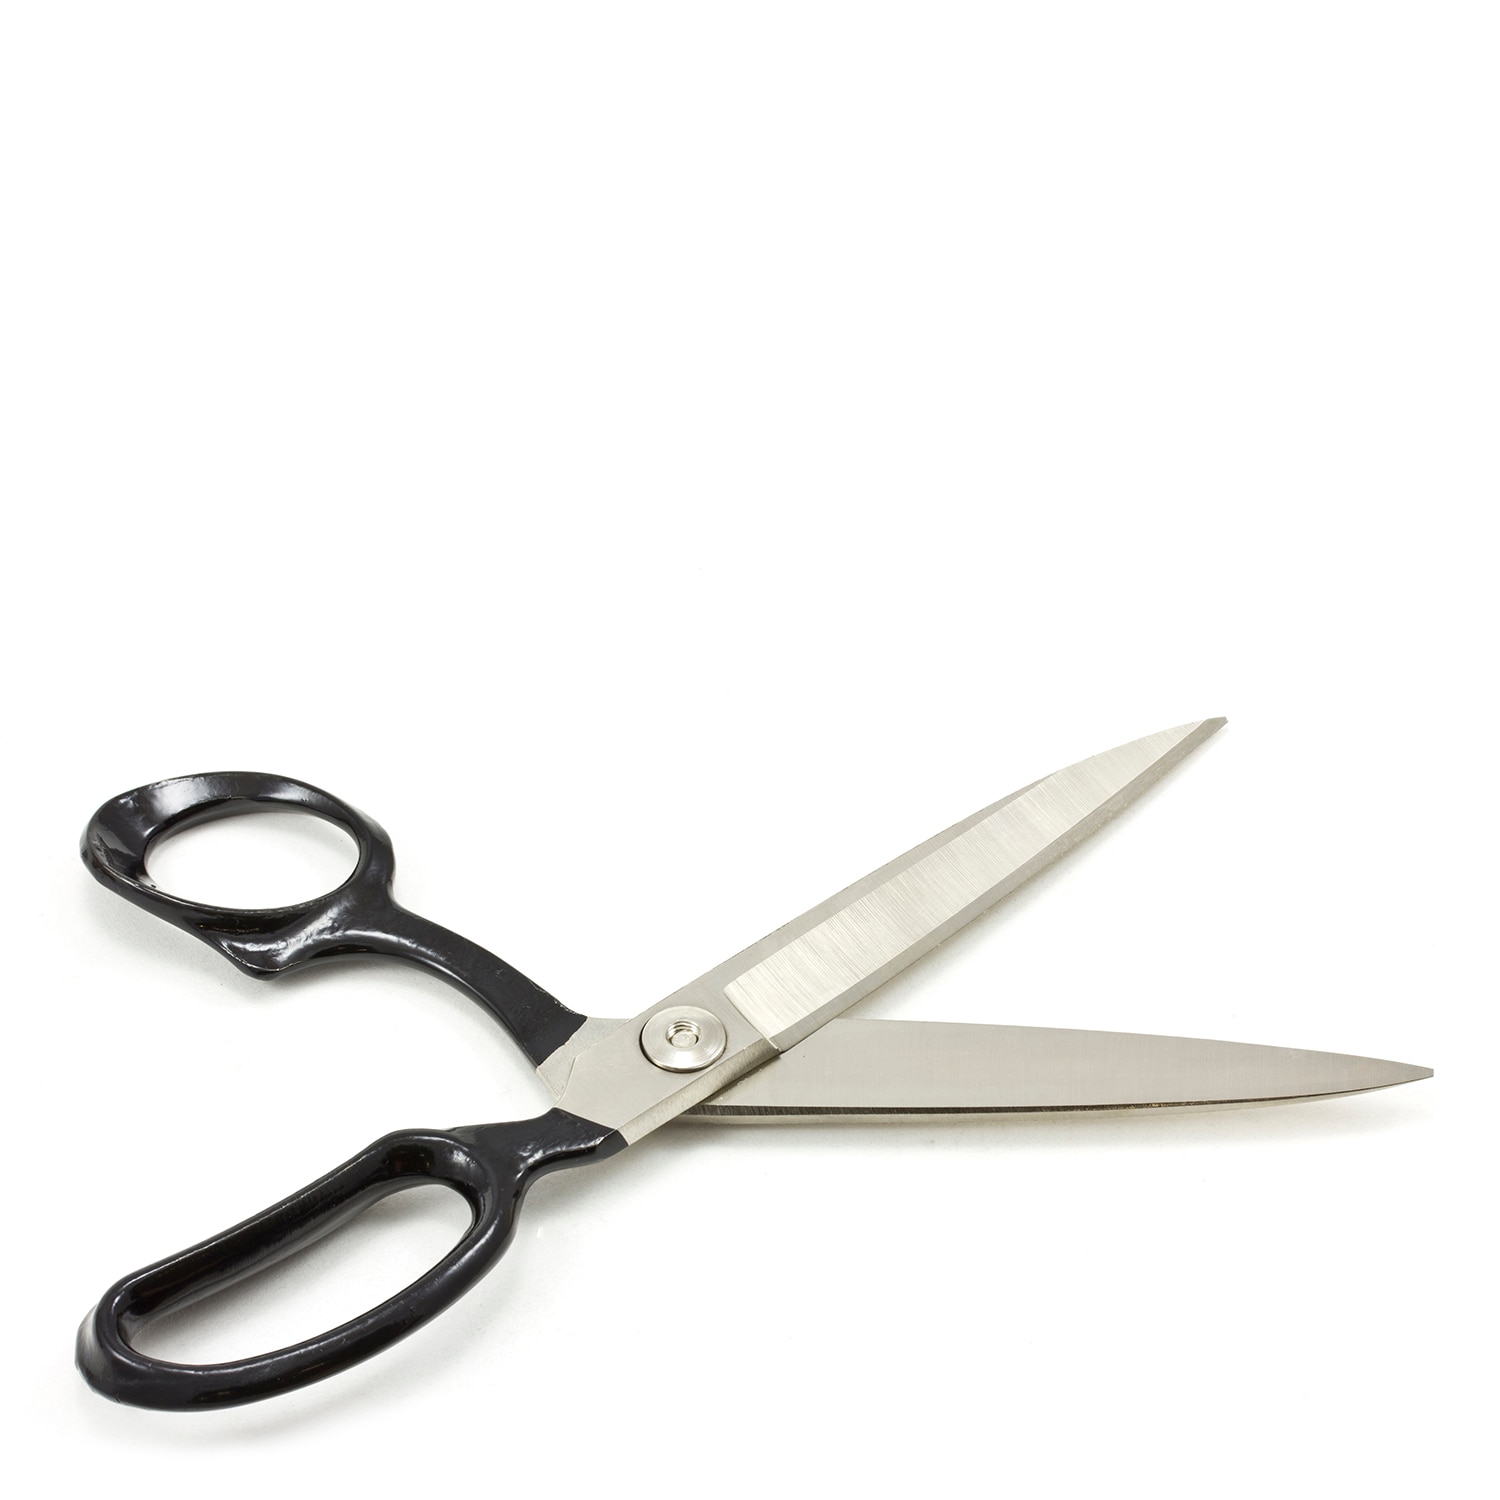 Shears WISS Knife Edge Upholstery Carpet and Fabric #1225 10-3/8